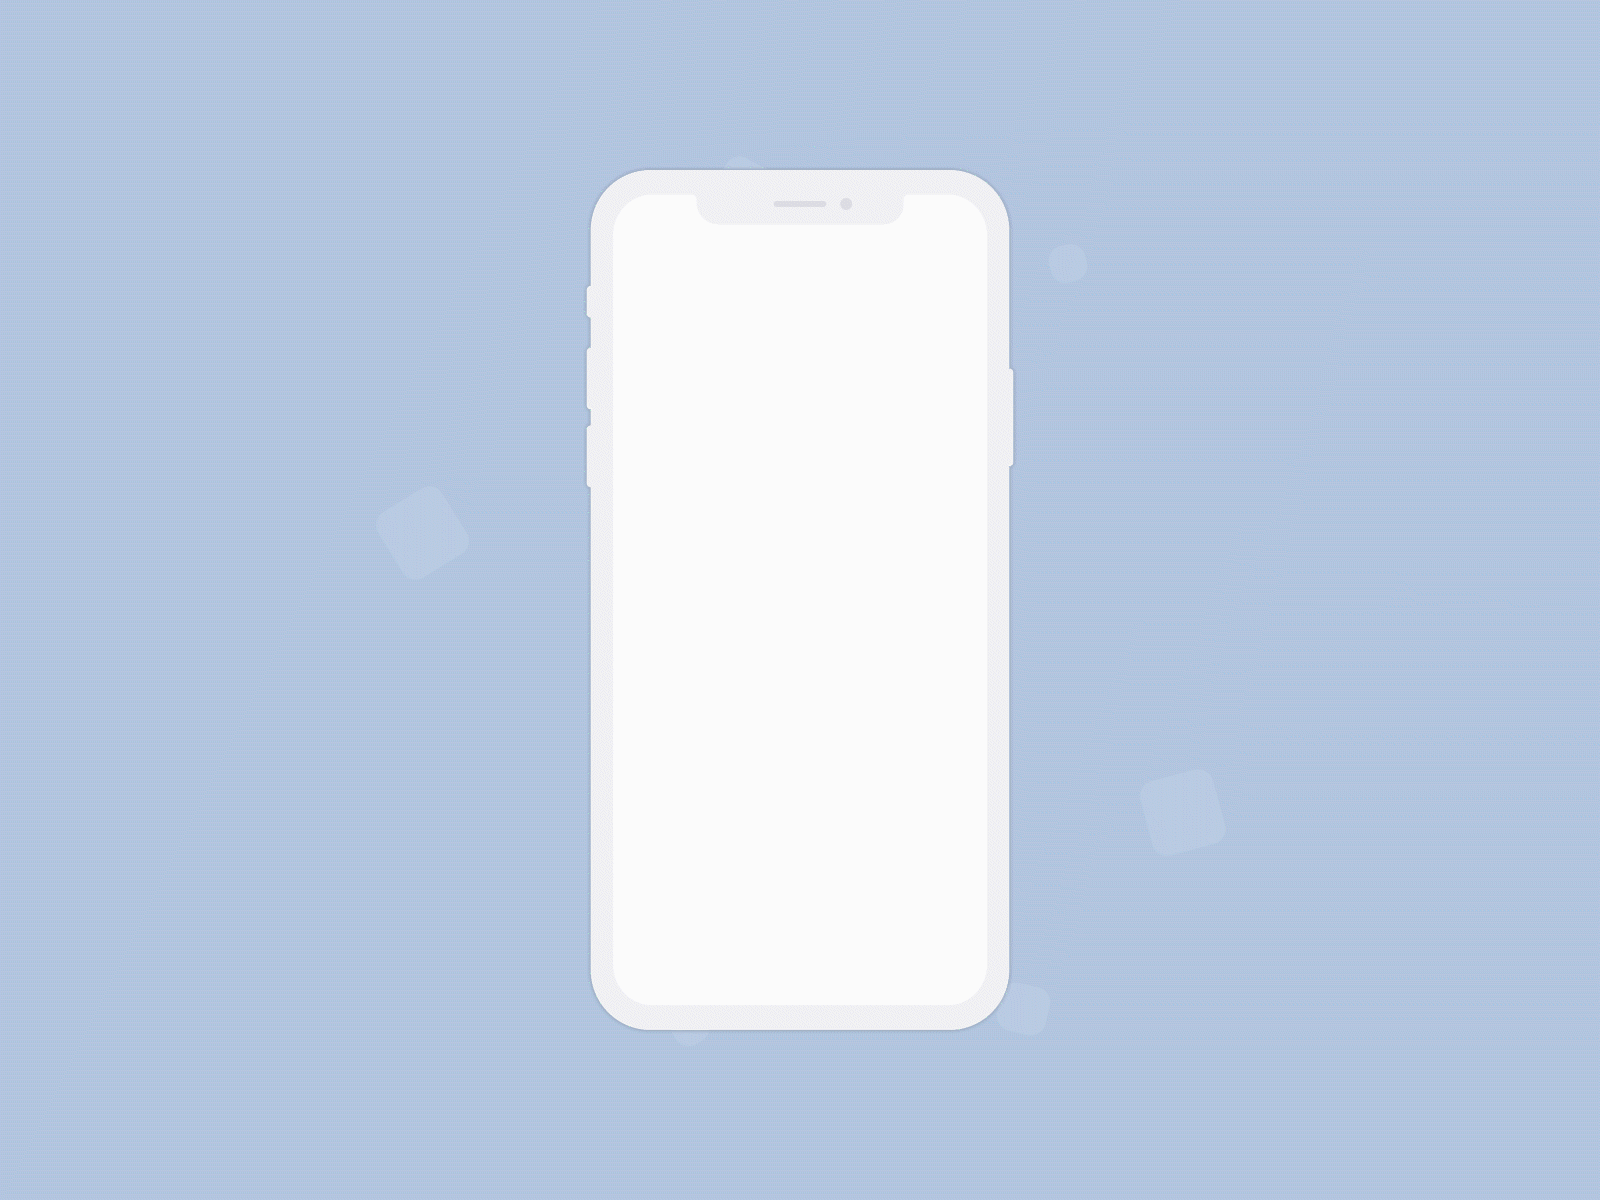 Morning Pages — Onboarding ios ios app mobile mobile app mobile design mobile onboarding mobile ui morning pages onboarding simple design ui uiux user experience ux